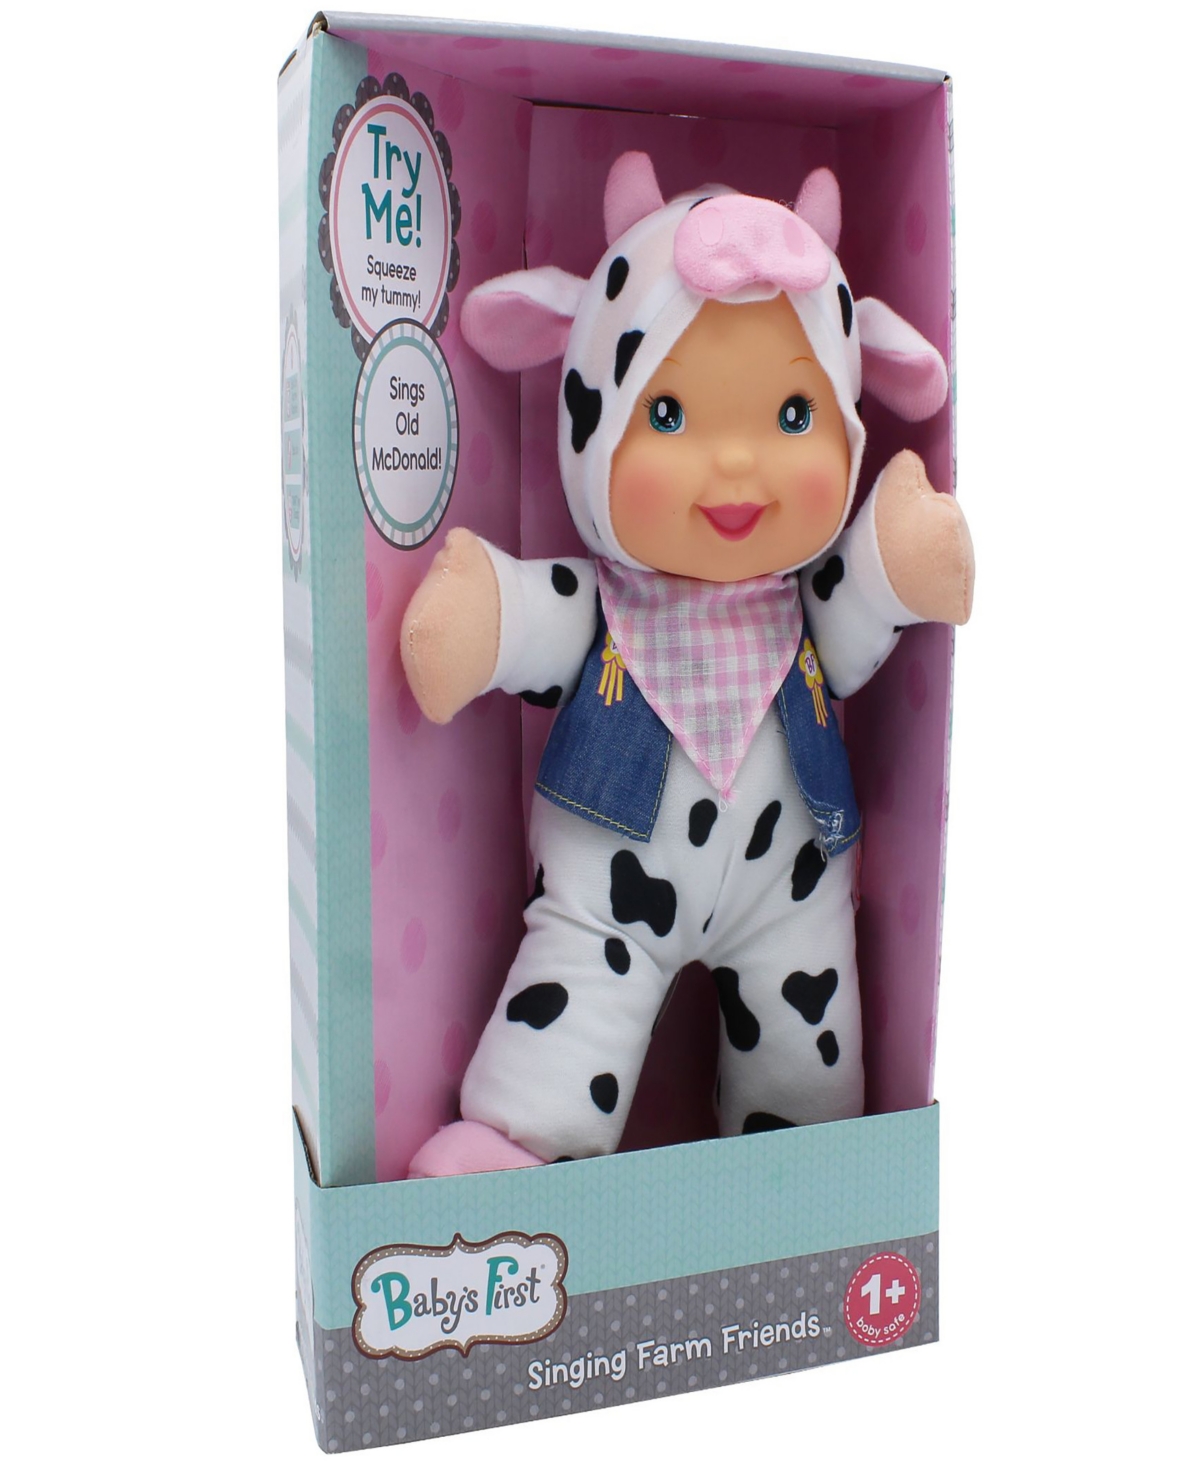 Baby's First By Nemcor Babies' Goldberger Doll Farm Animal Friends Cow Bi-lingual English And Spanish In Multi